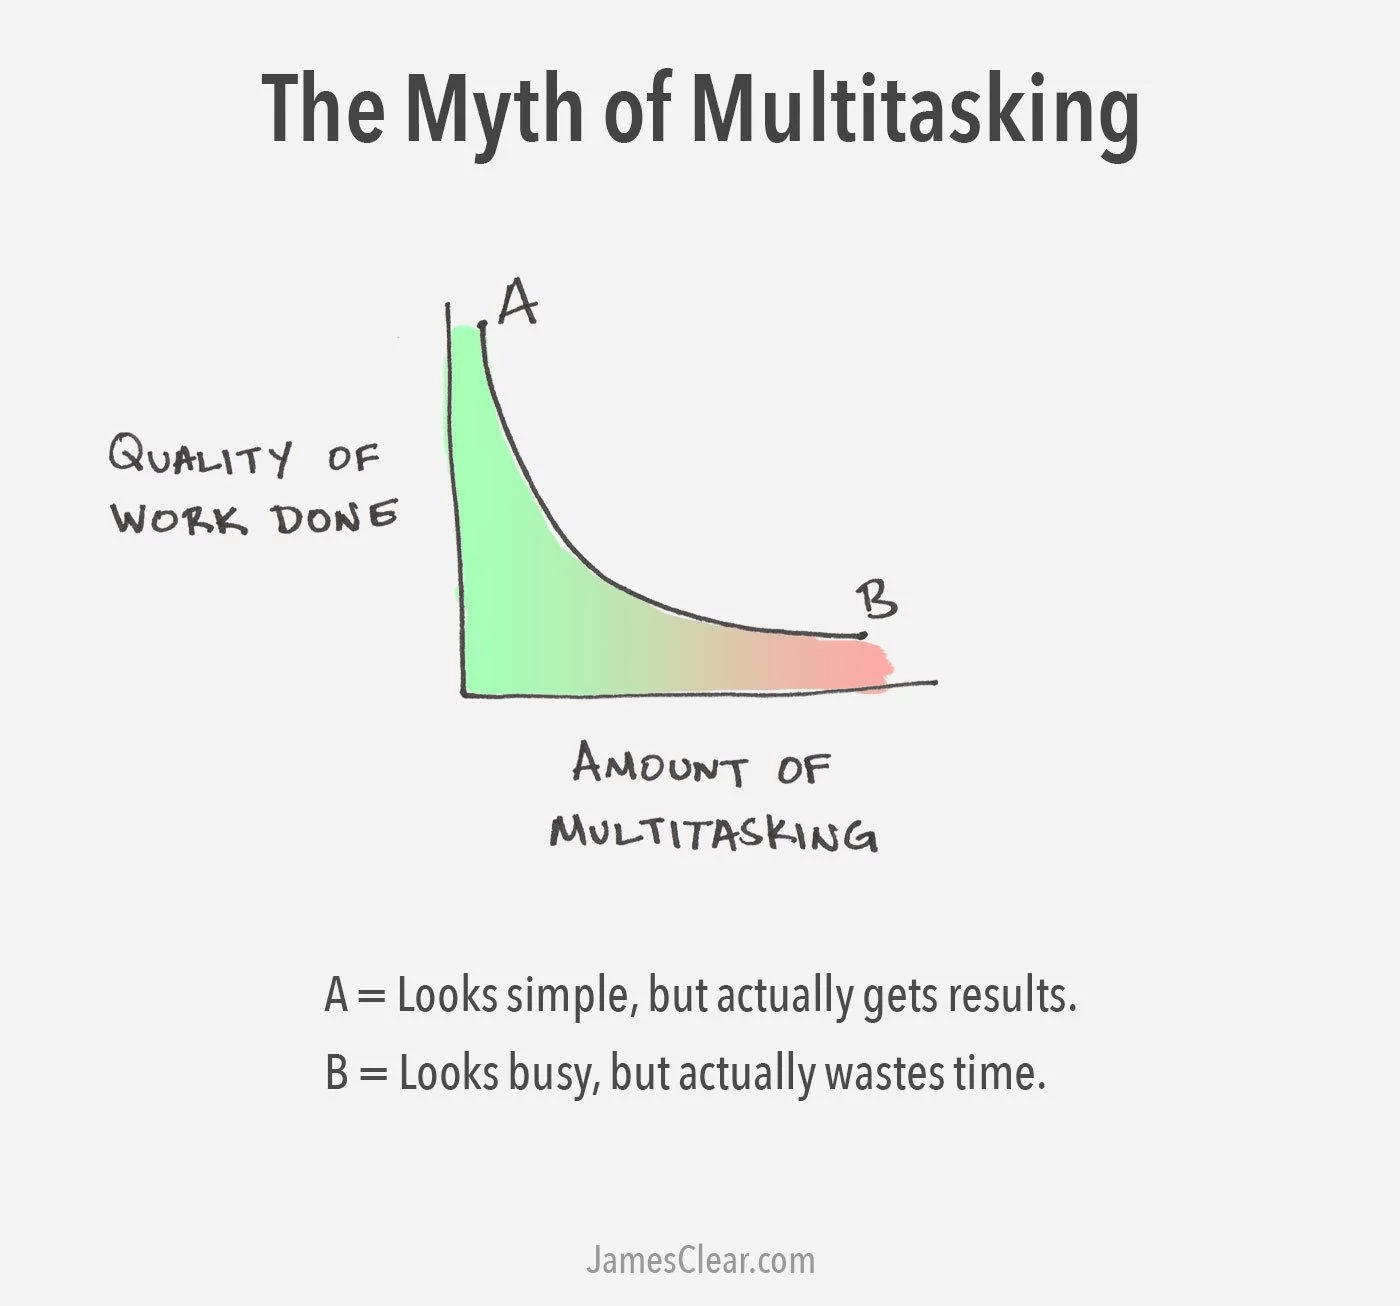 multitasking doesn't help you get more done